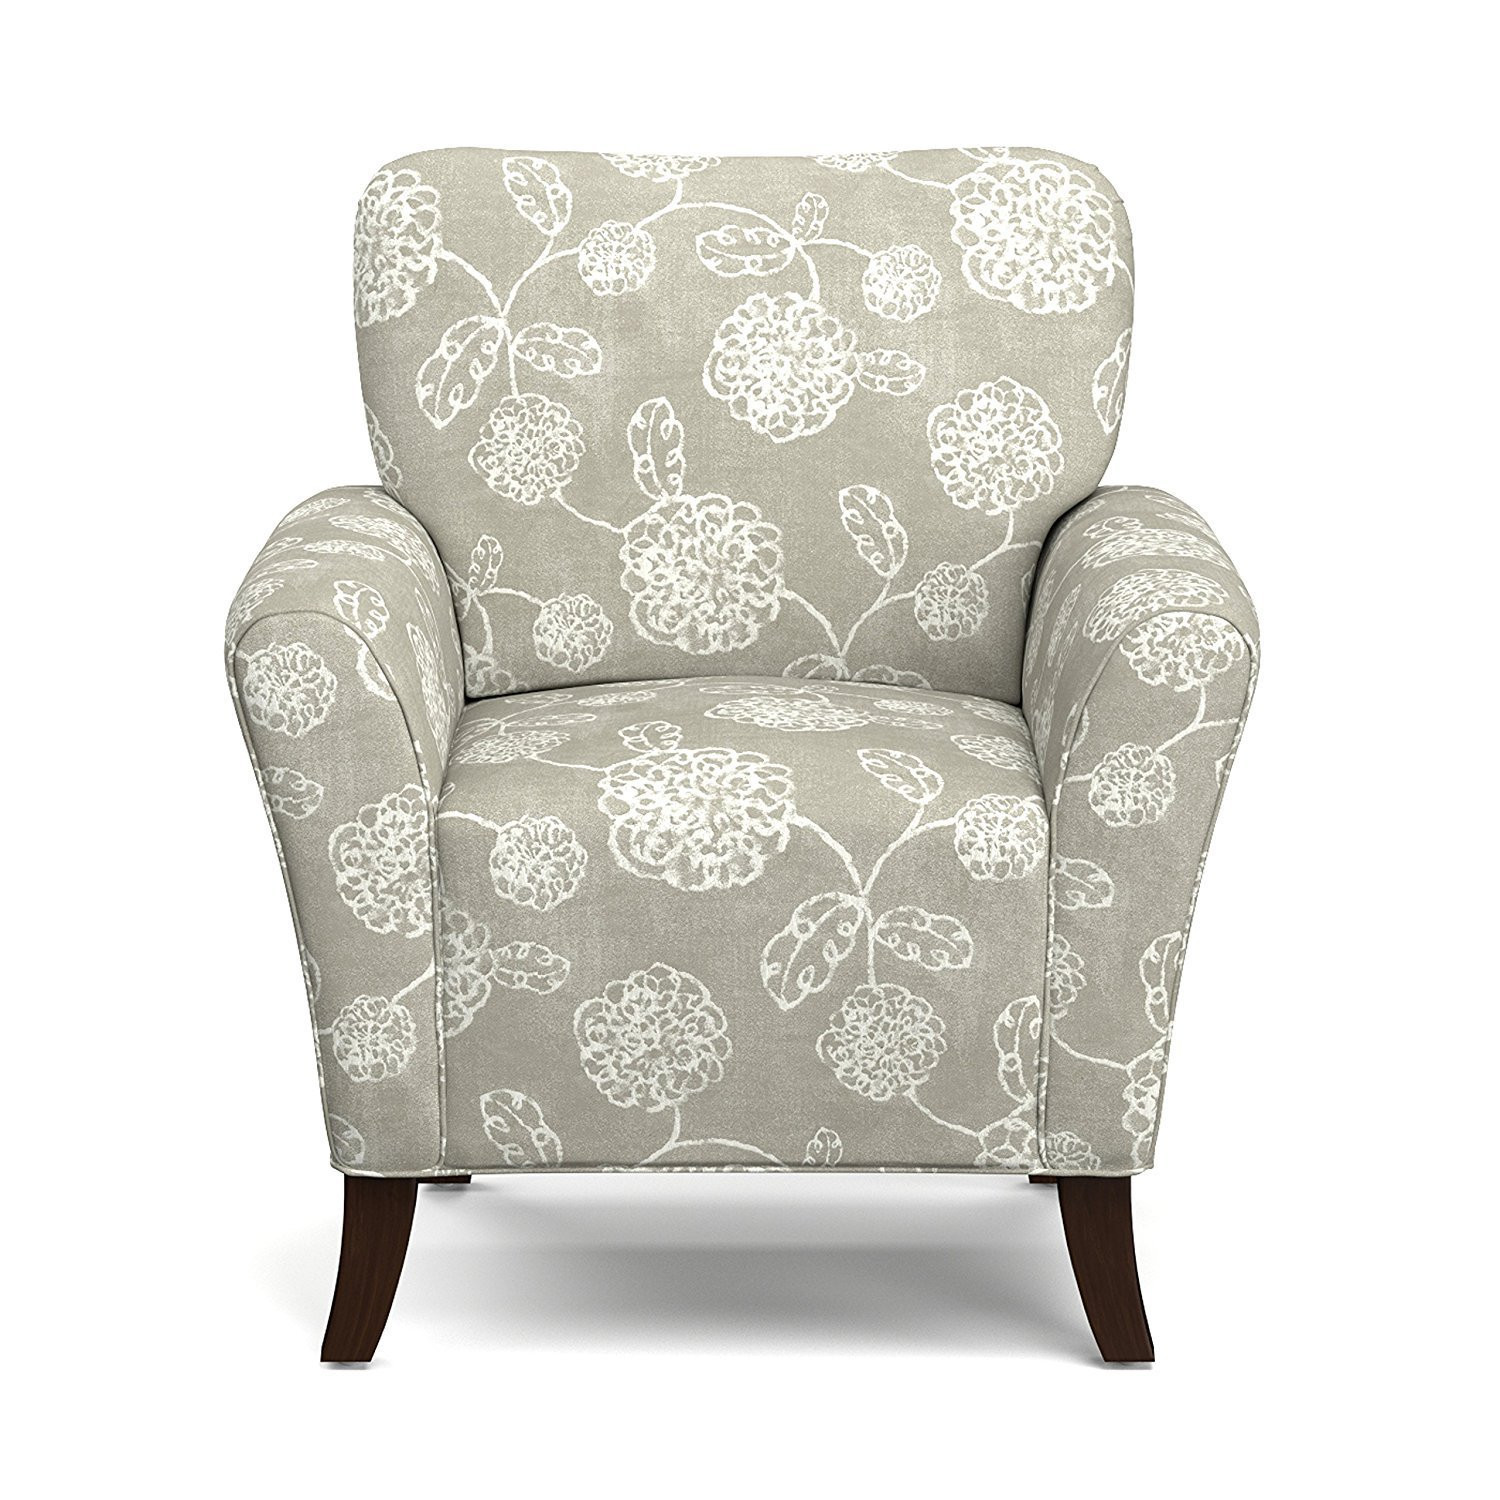 Upholstered Living Room Chairs
 Upholstered Living Room Chairs Home Furniture Design